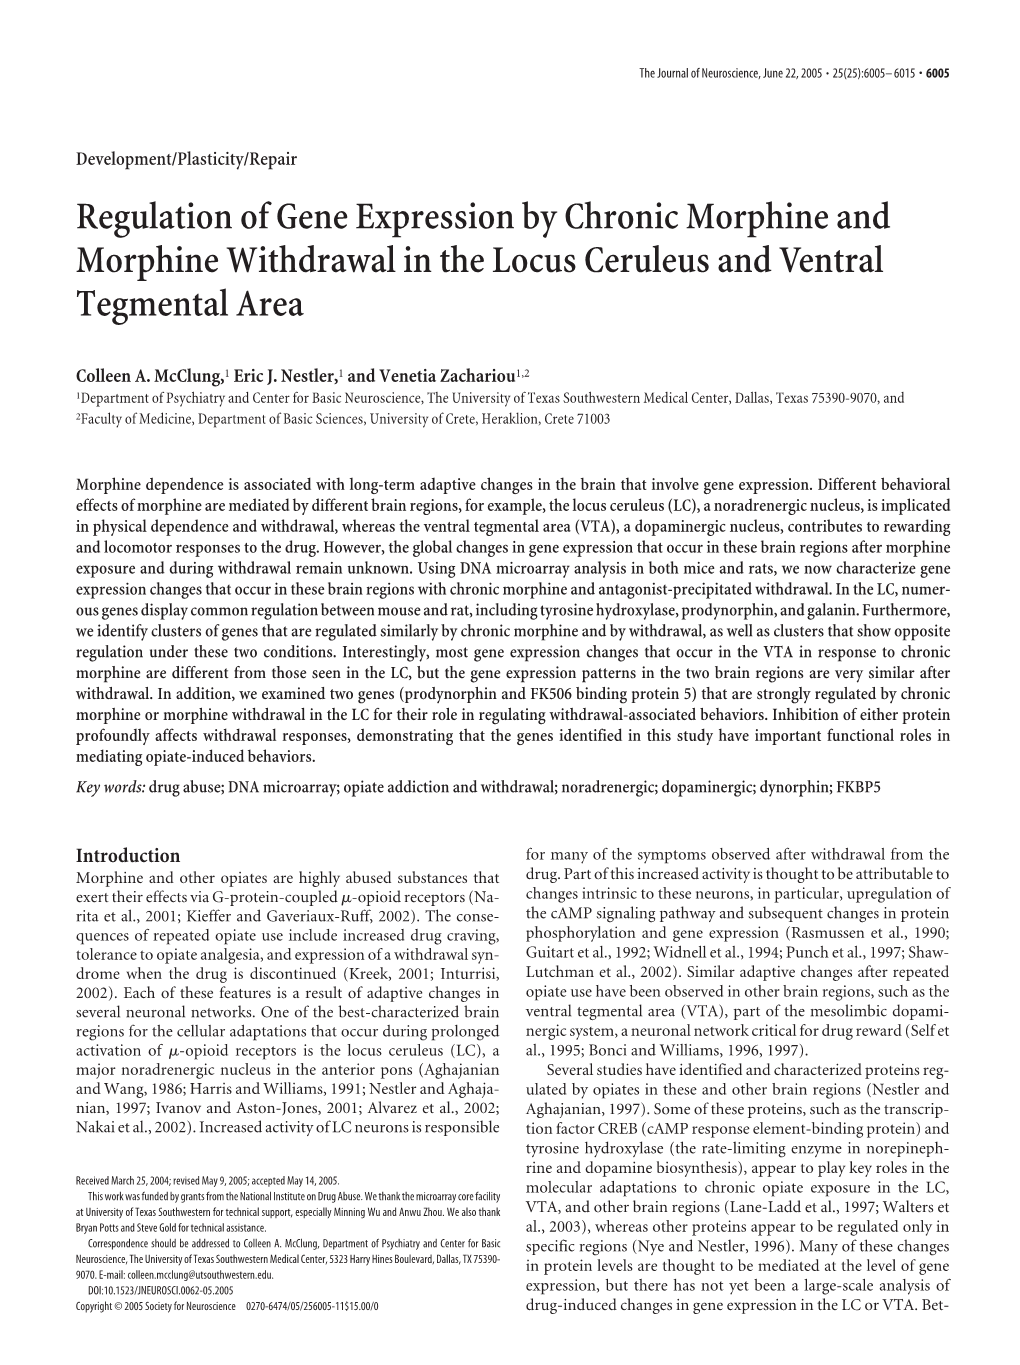 Regulation of Gene Expression by Chronic Morphine and Morphine Withdrawal in the Locus Ceruleus and Ventral Tegmental Area